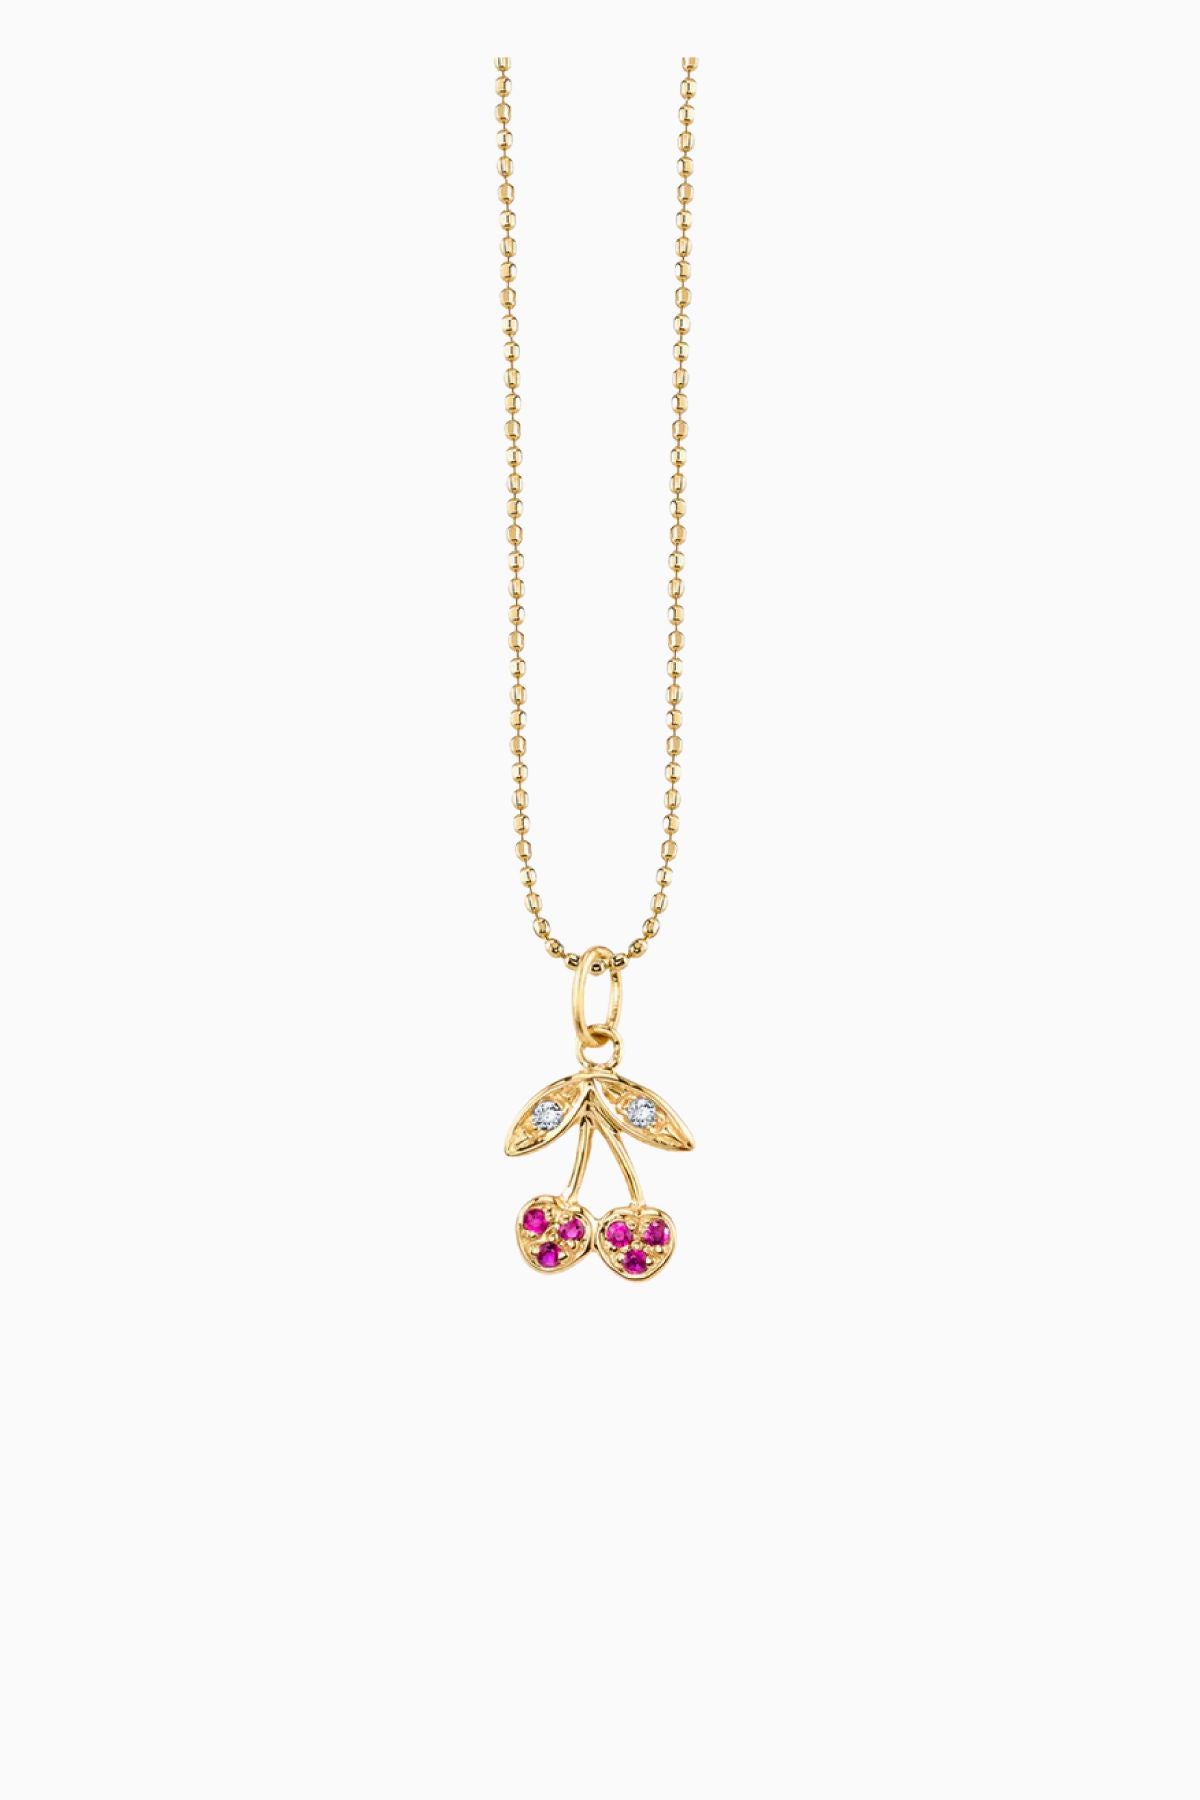 Sydney Evan Small Cherry Charm Necklace - Yellow Gold